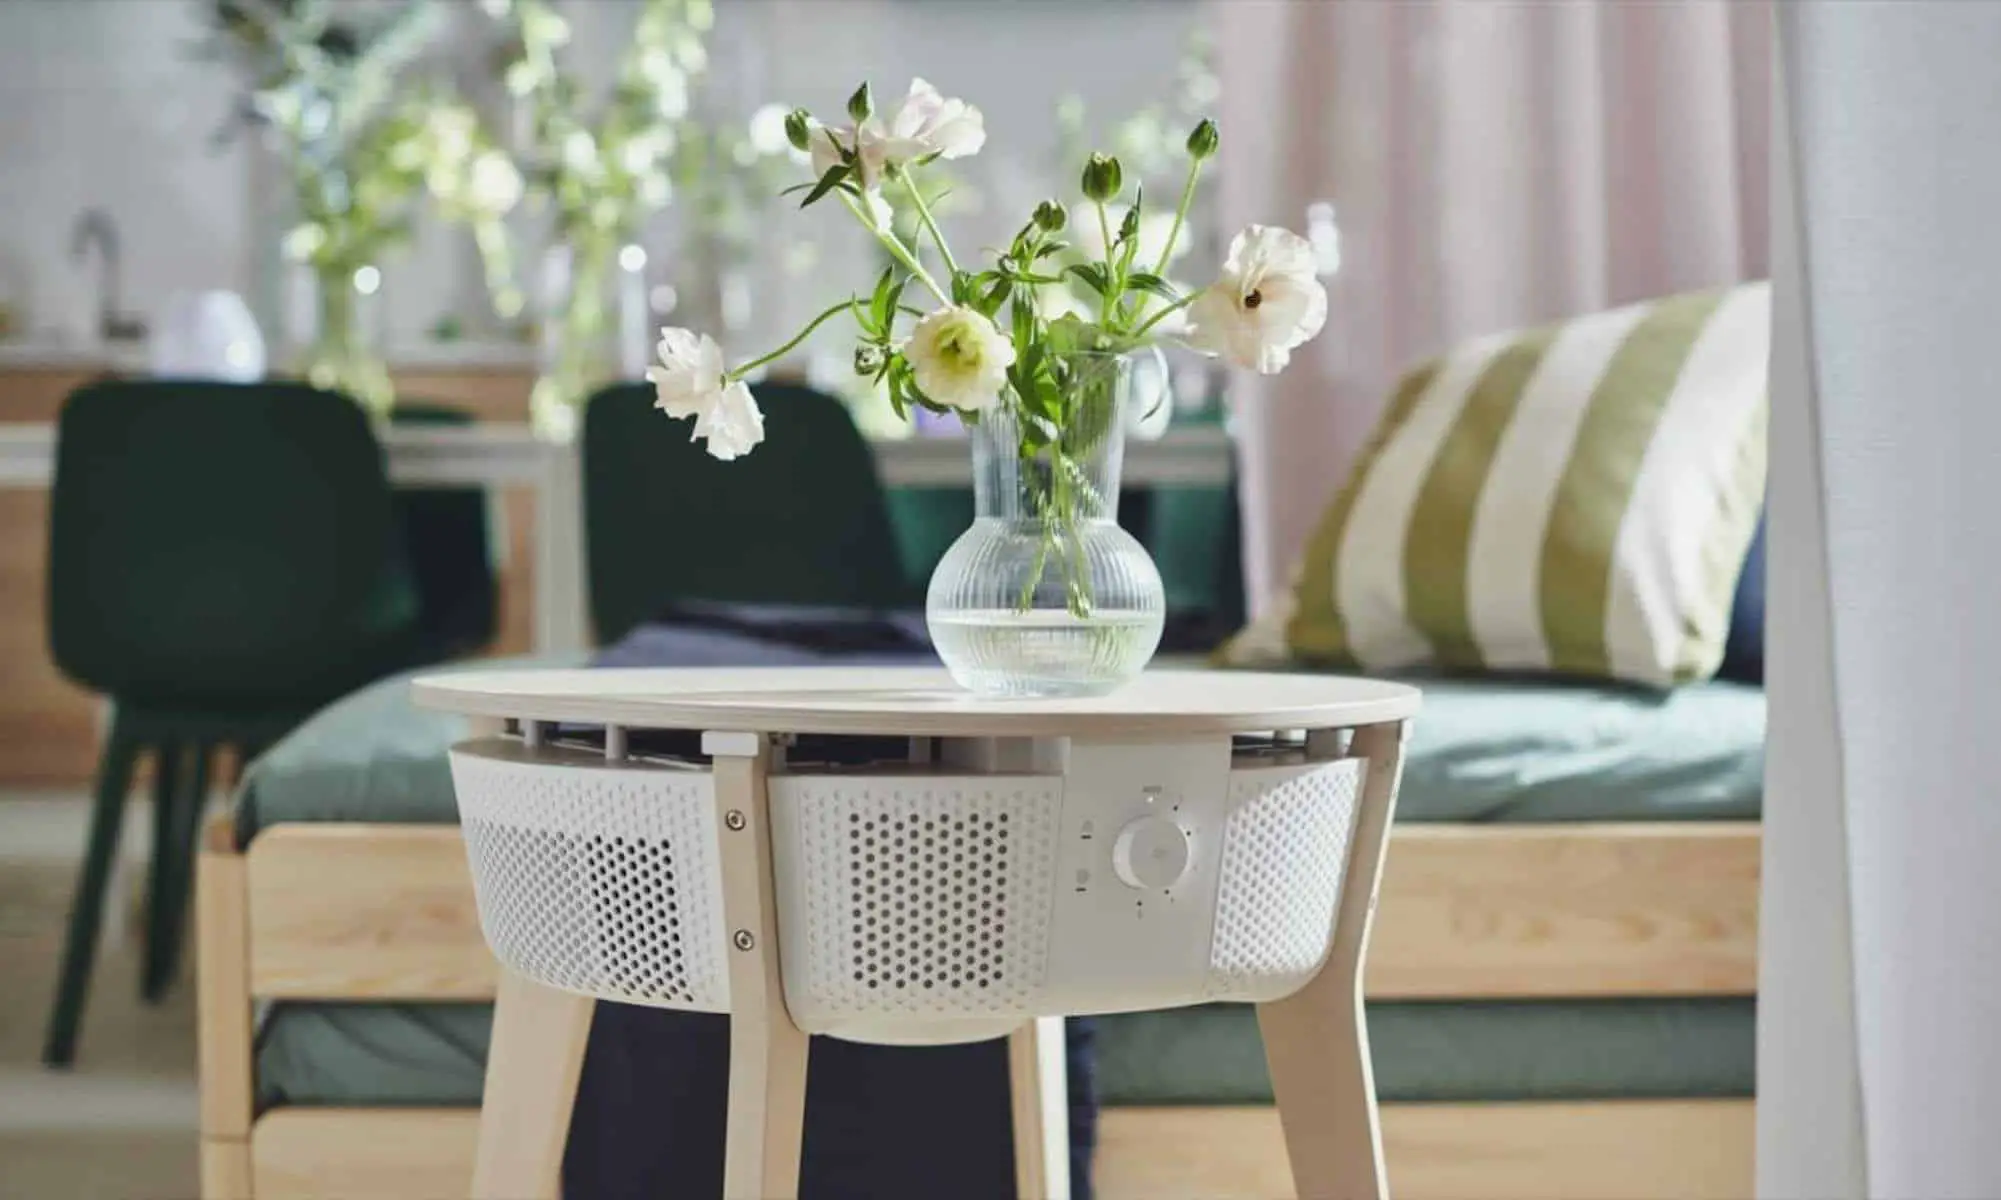 IKEA just made a smart air purifier that also doubles as a side table